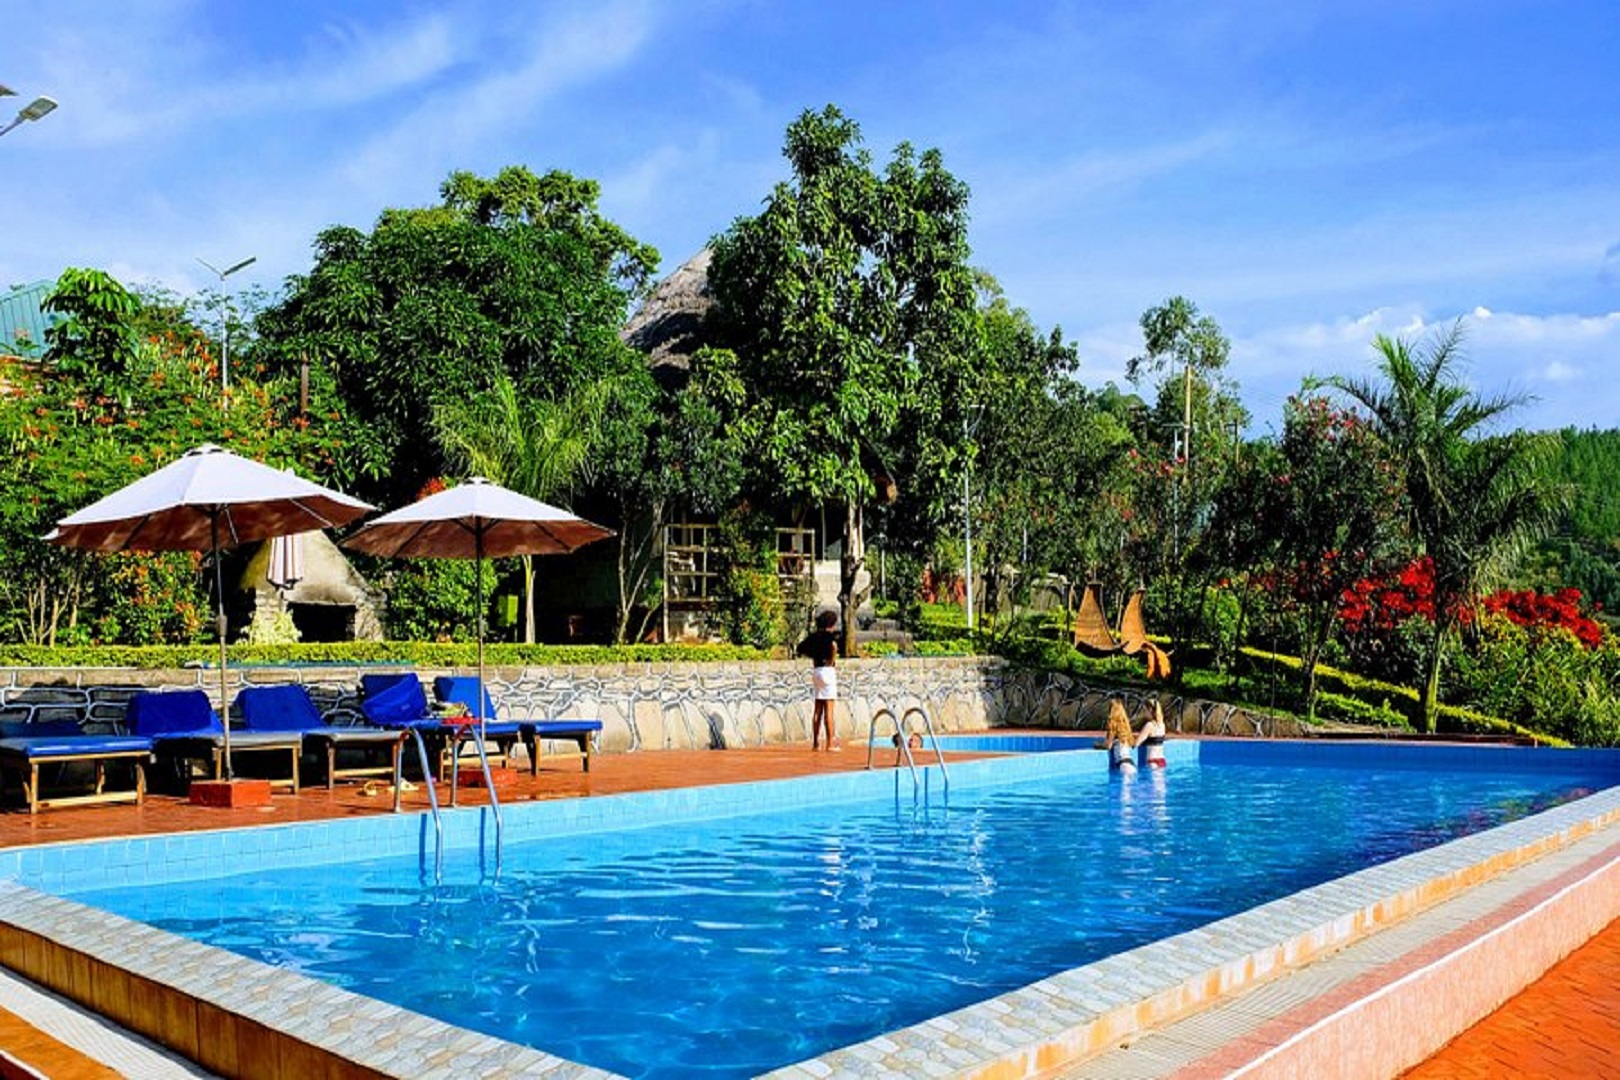 Swimming pool side at Parkview Safari Lodge, Queen Elizabeth National Park